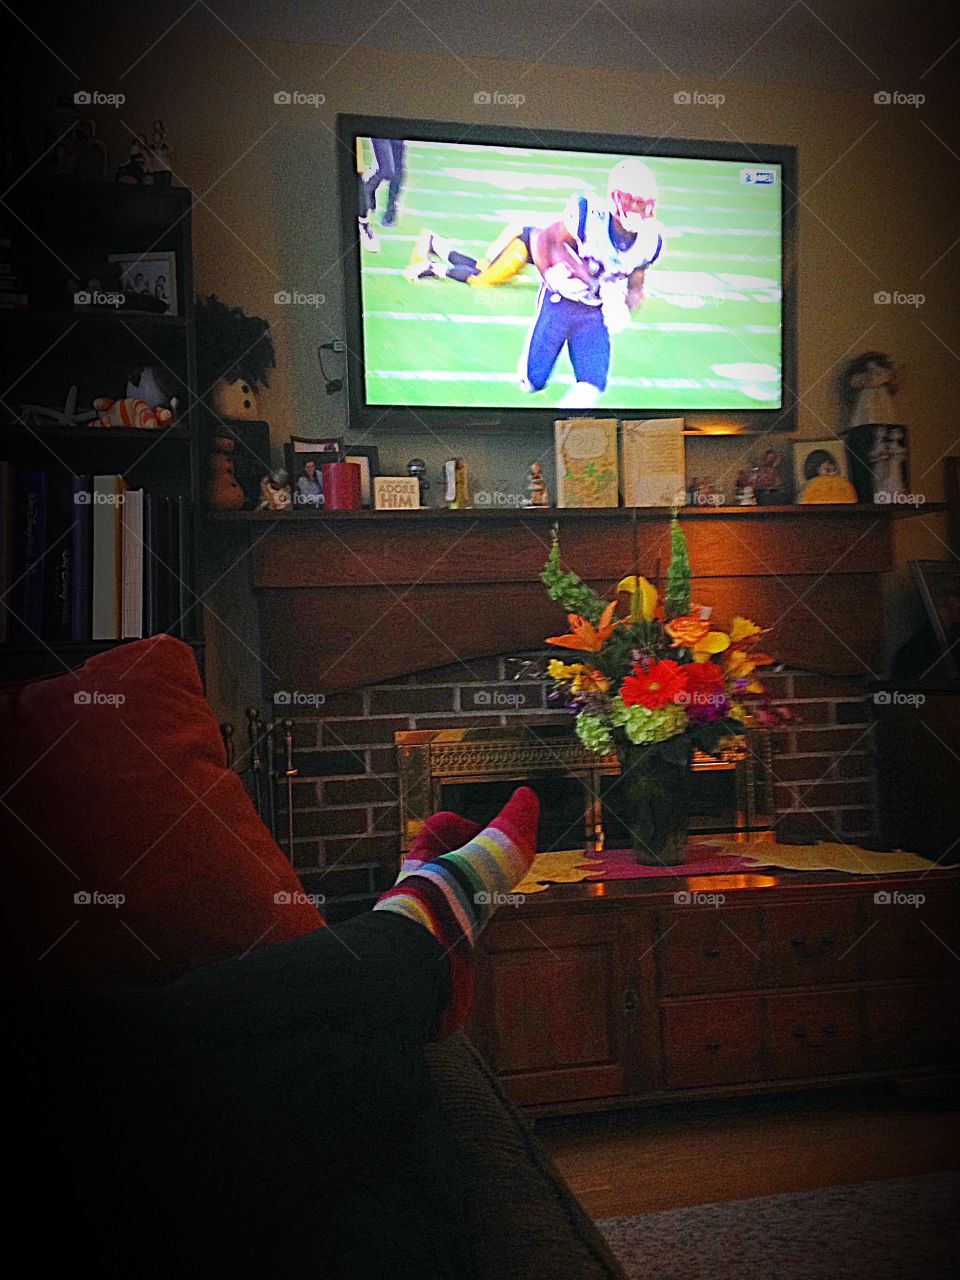 Watching the game - Go Pats! 
